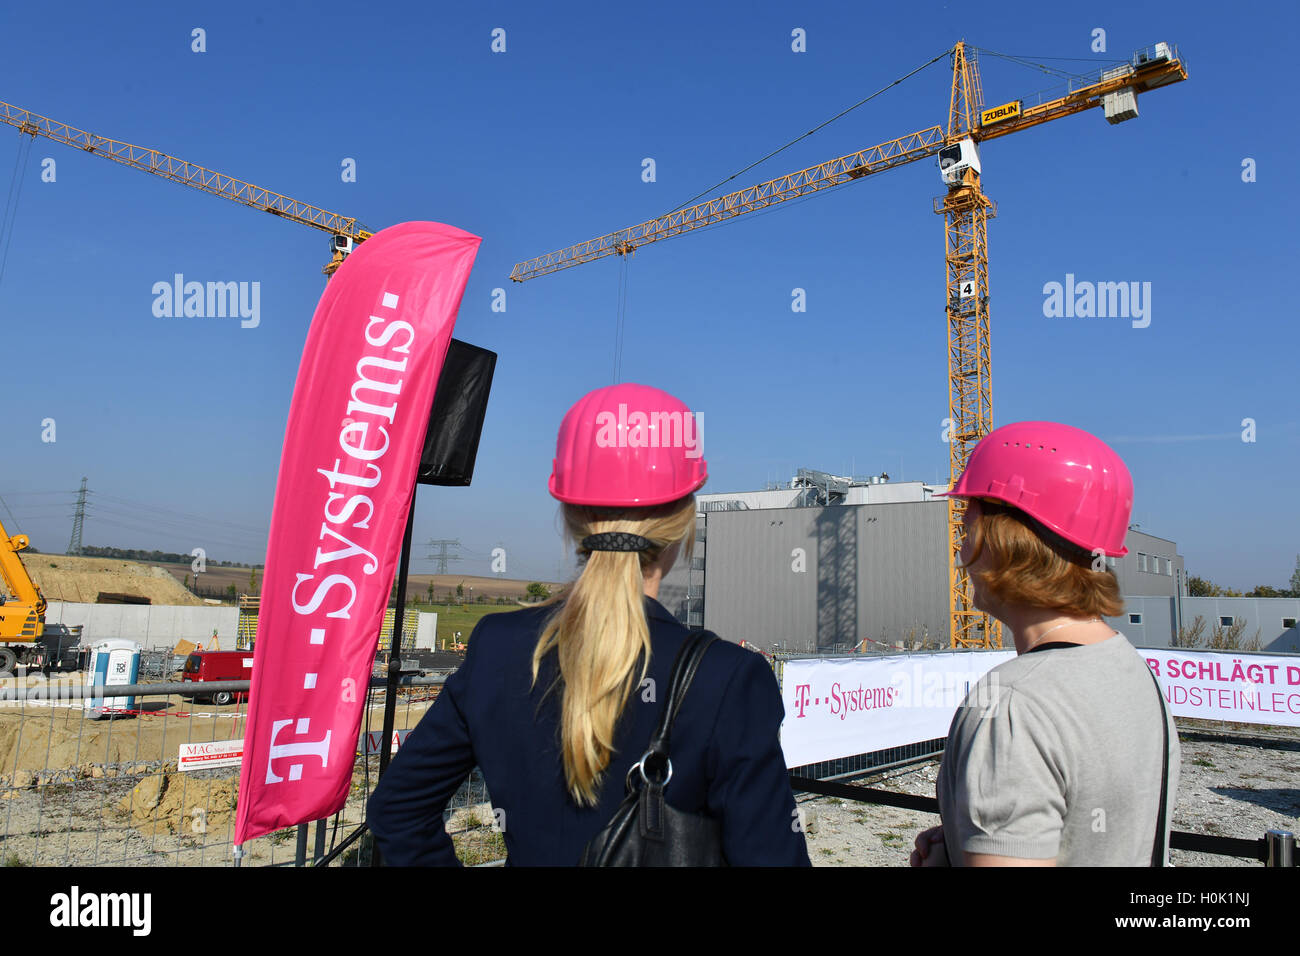 Biere, Germany. 12th Sep, 2016. Women wear protection helmets in the colour magenta, the logo colour of Deutsche Telekom, at the laying of the first stone for the expansion of the Cloud-Rechenzentrum of Deutsche Telekom in Biere, Germany, 12 September 2016. Photo: Jens Kalaene/dpa/Alamy Live News Stock Photo